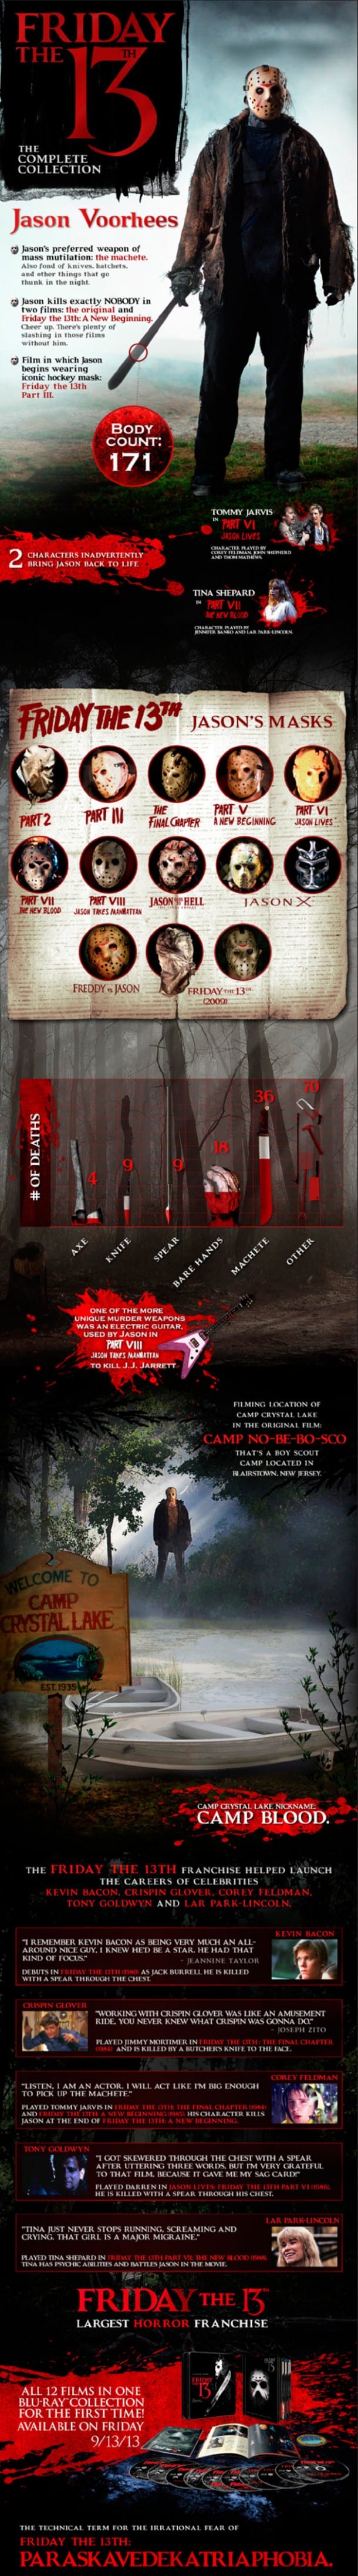 Friday the 13th Body Count Infographic